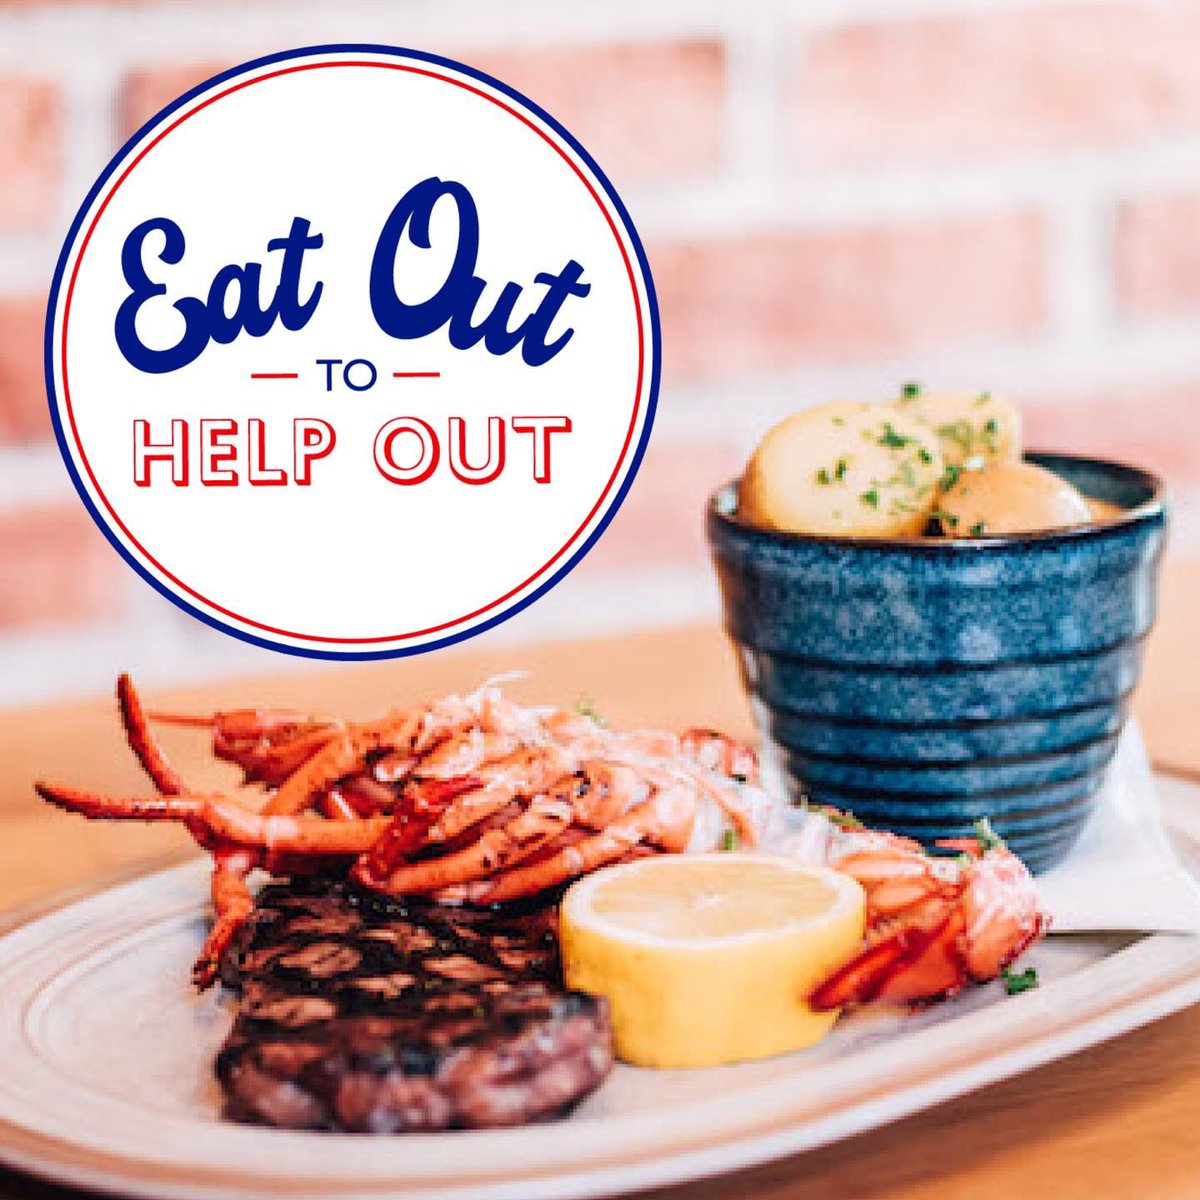 We will be taking part in the #EatOutToHelpOut scheme, but what does that mean for you? On Mondays, Tuesdays and Wednesdays from 3rd to 29th August there will be 50% off food and non-alcoholic drinks up to the value of £10 per person. This includes all our meals and set menus.